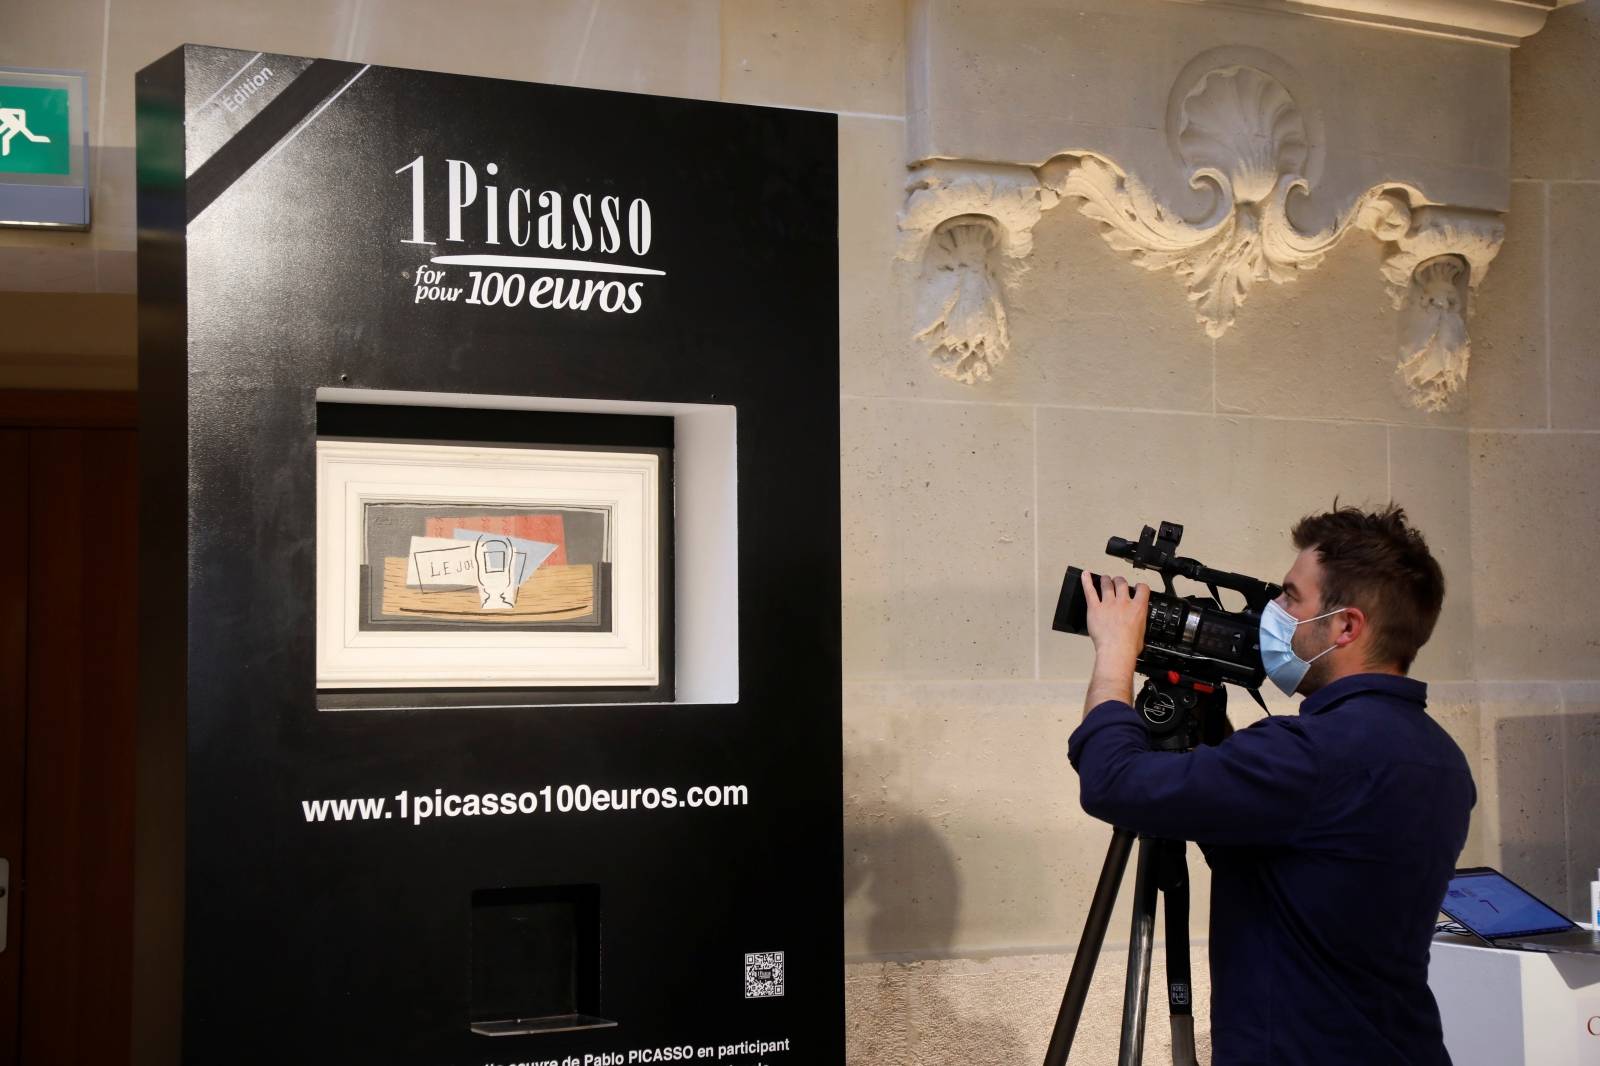 Charity raffle draw designates the winner of a Picasso oil painting for 100 euros at Christie's Paris